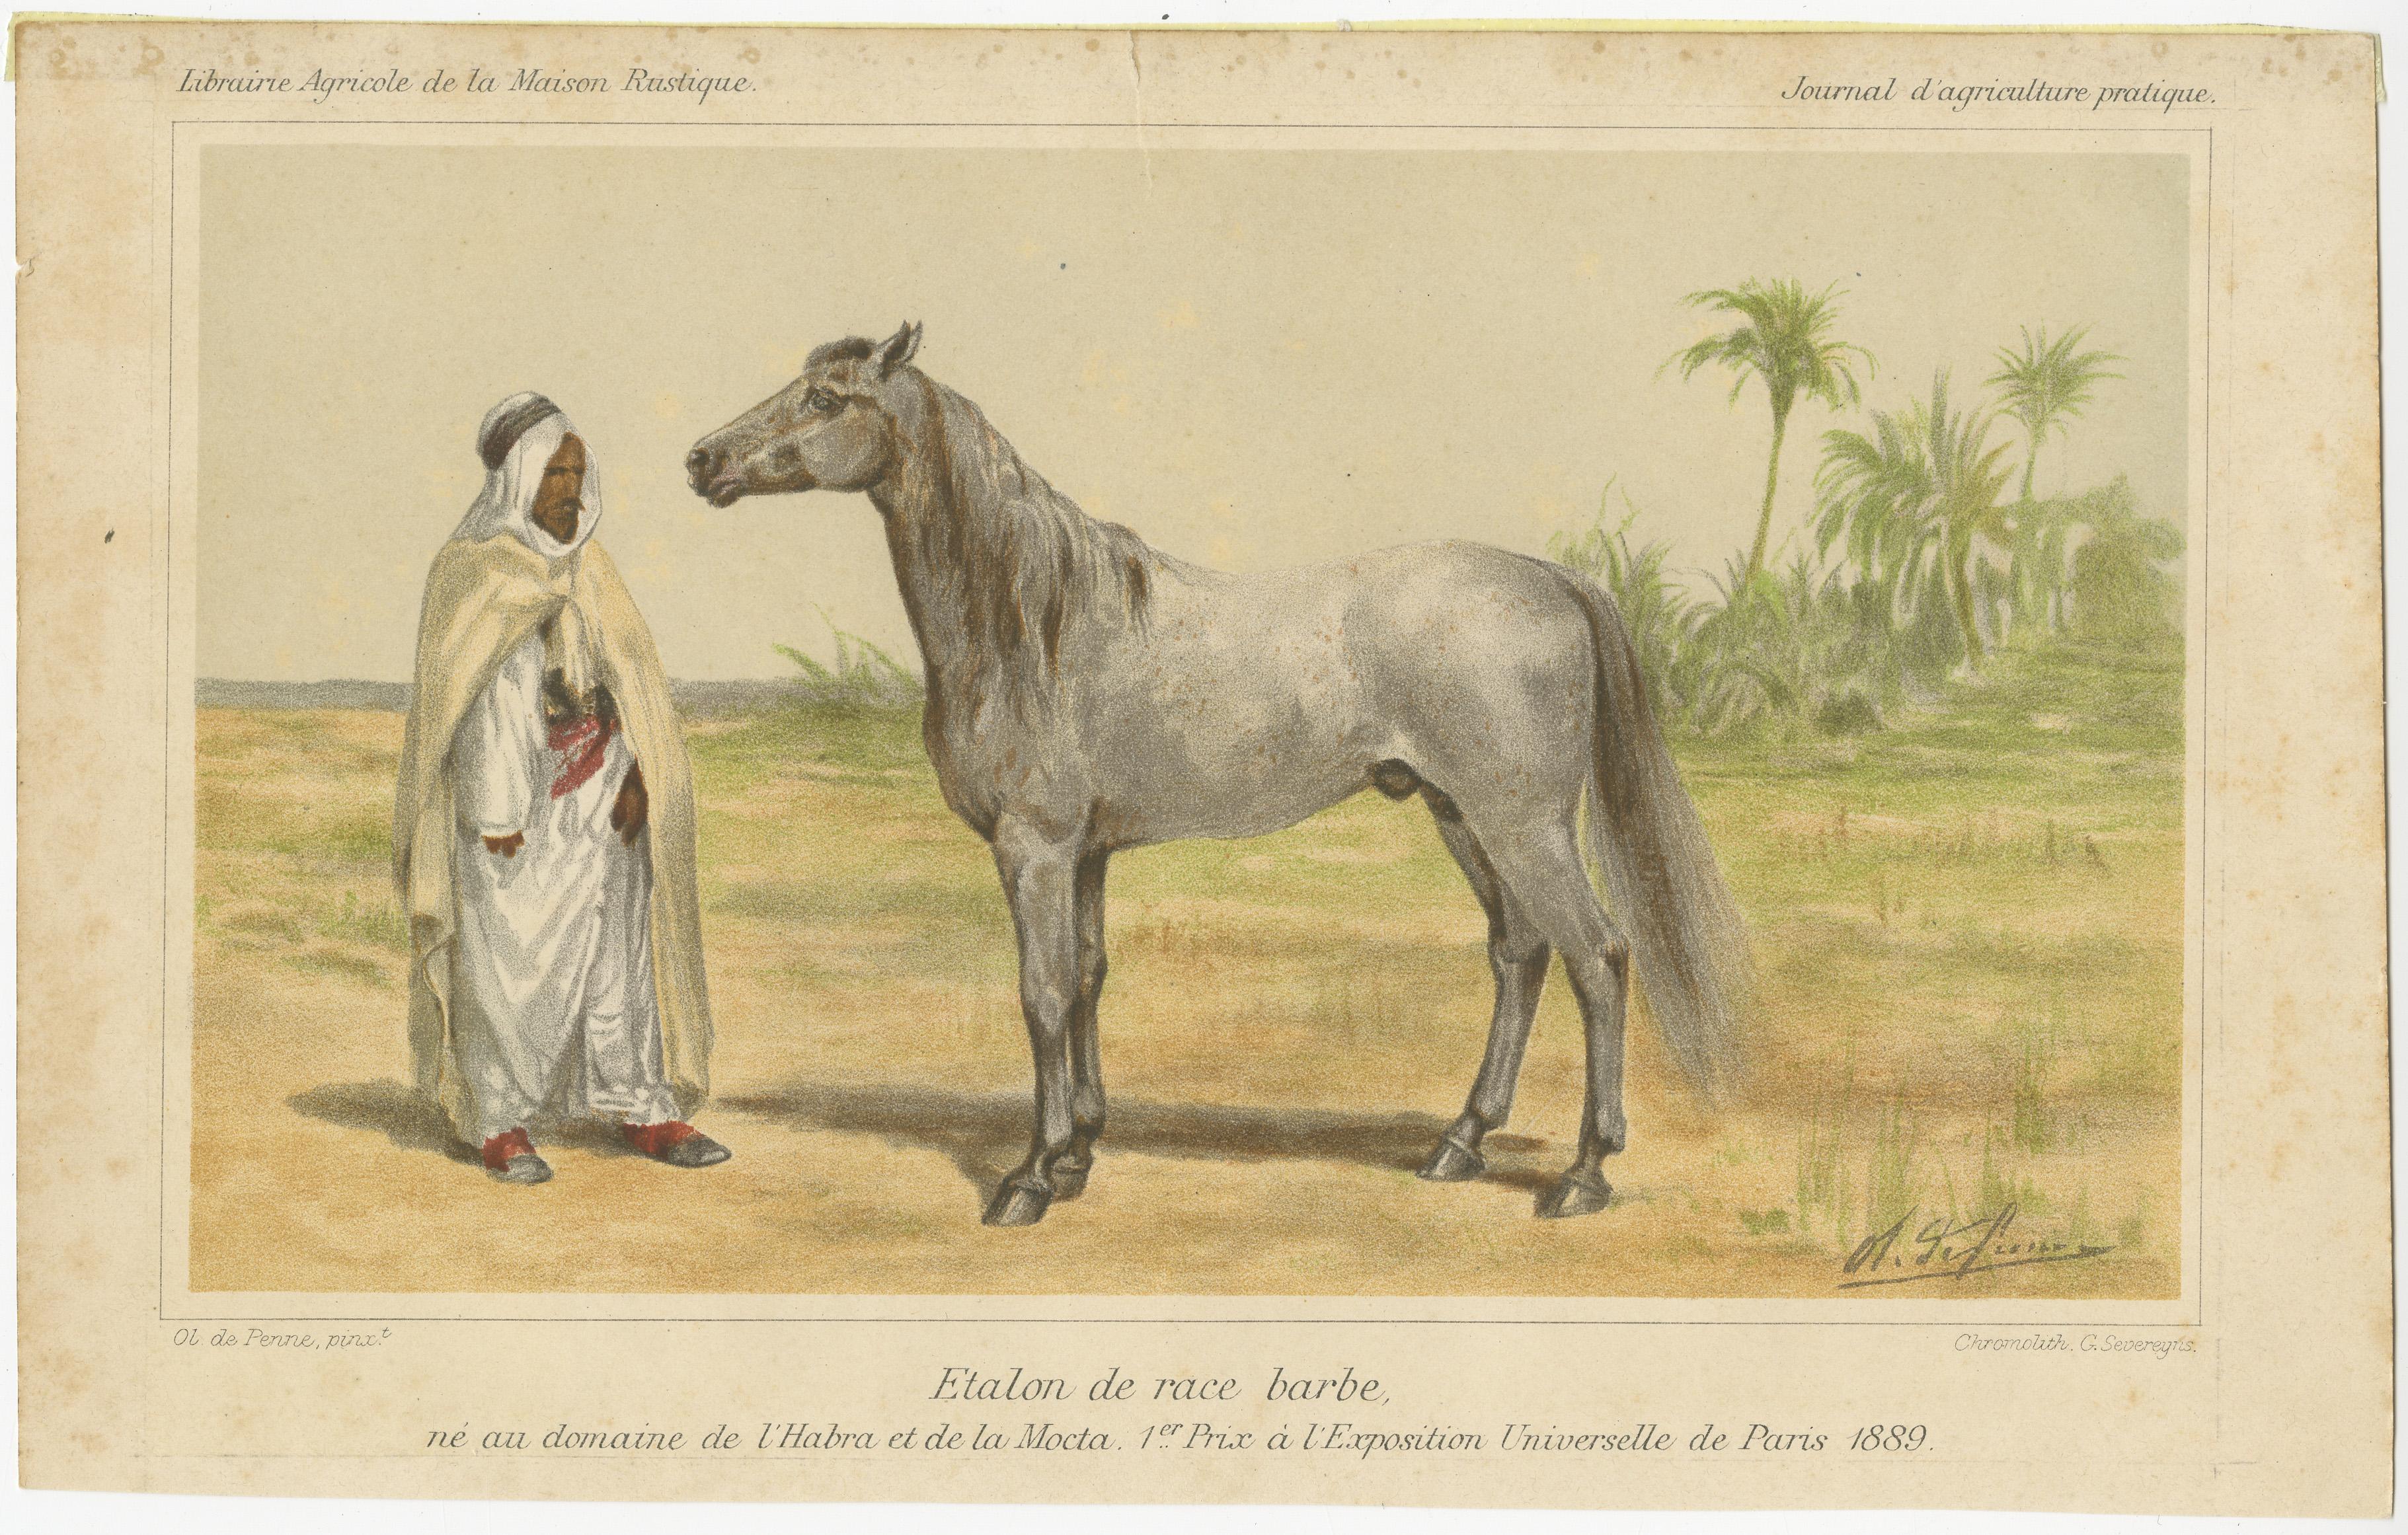 Antique print titled 'Etalon de race barbe'. Chromolithograph of a Barb or Berber horse.  A Barb is a North African breed of riding horse with great hardiness and stamina. It is closely associated with the Berber or Amazigh peoples of the Maghreb.